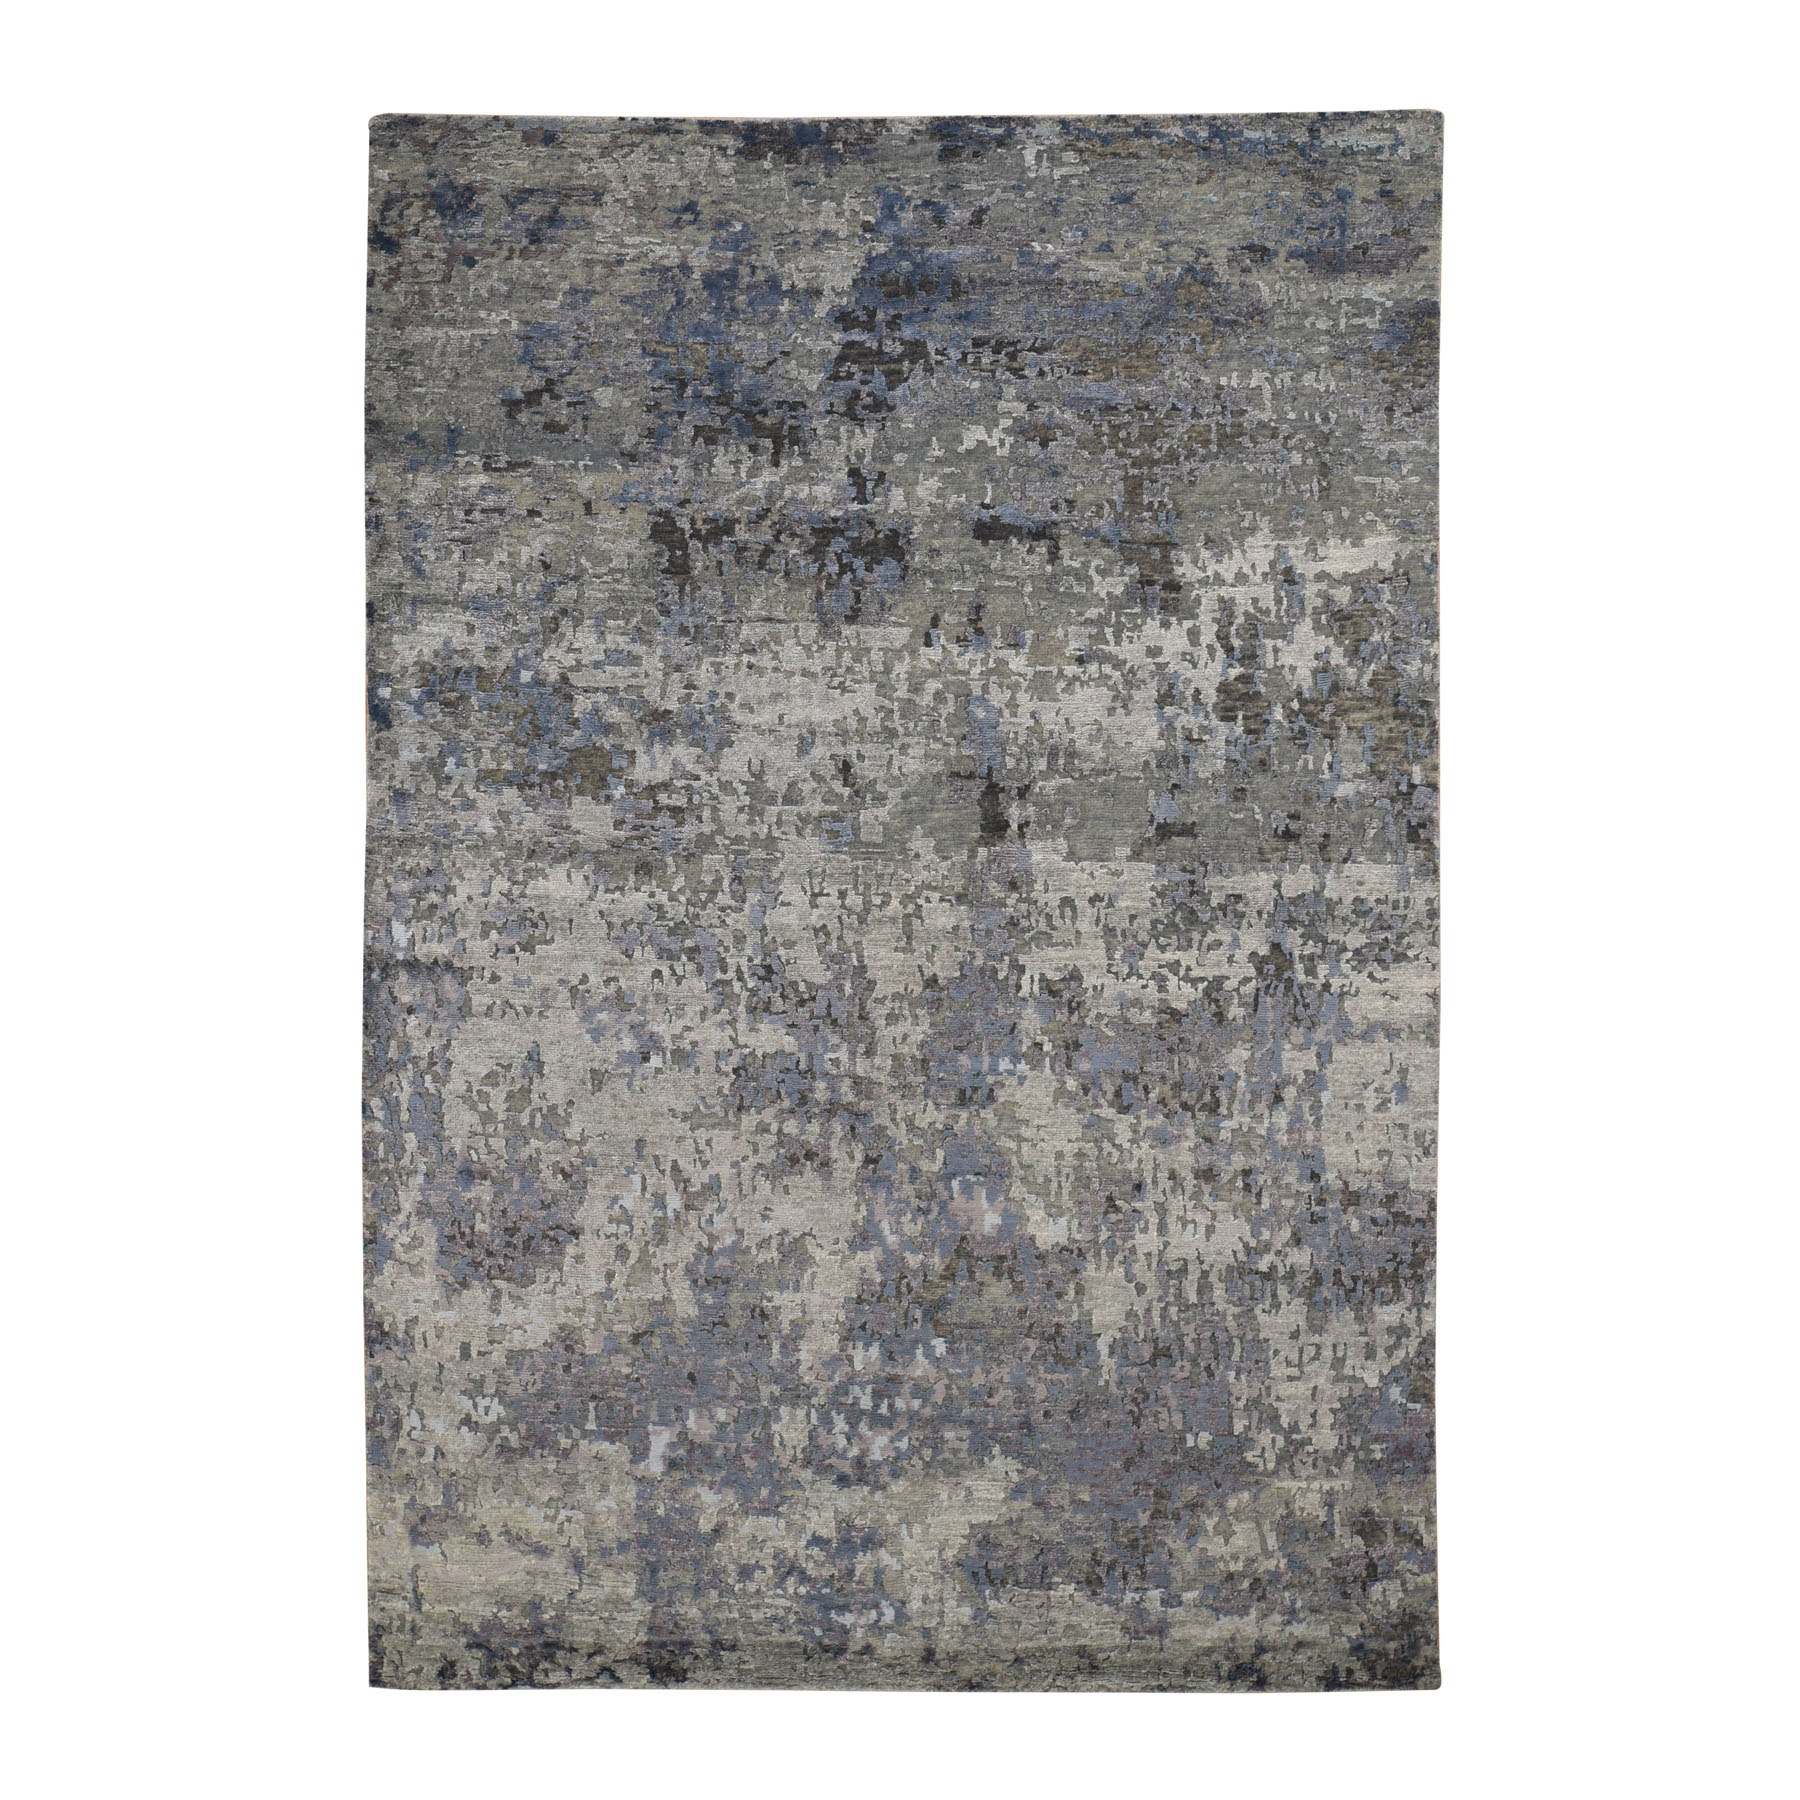 6'x8'10" Hi-Low Pile Abstract Design Wool And Silk Hand Woven Oriental Rug 